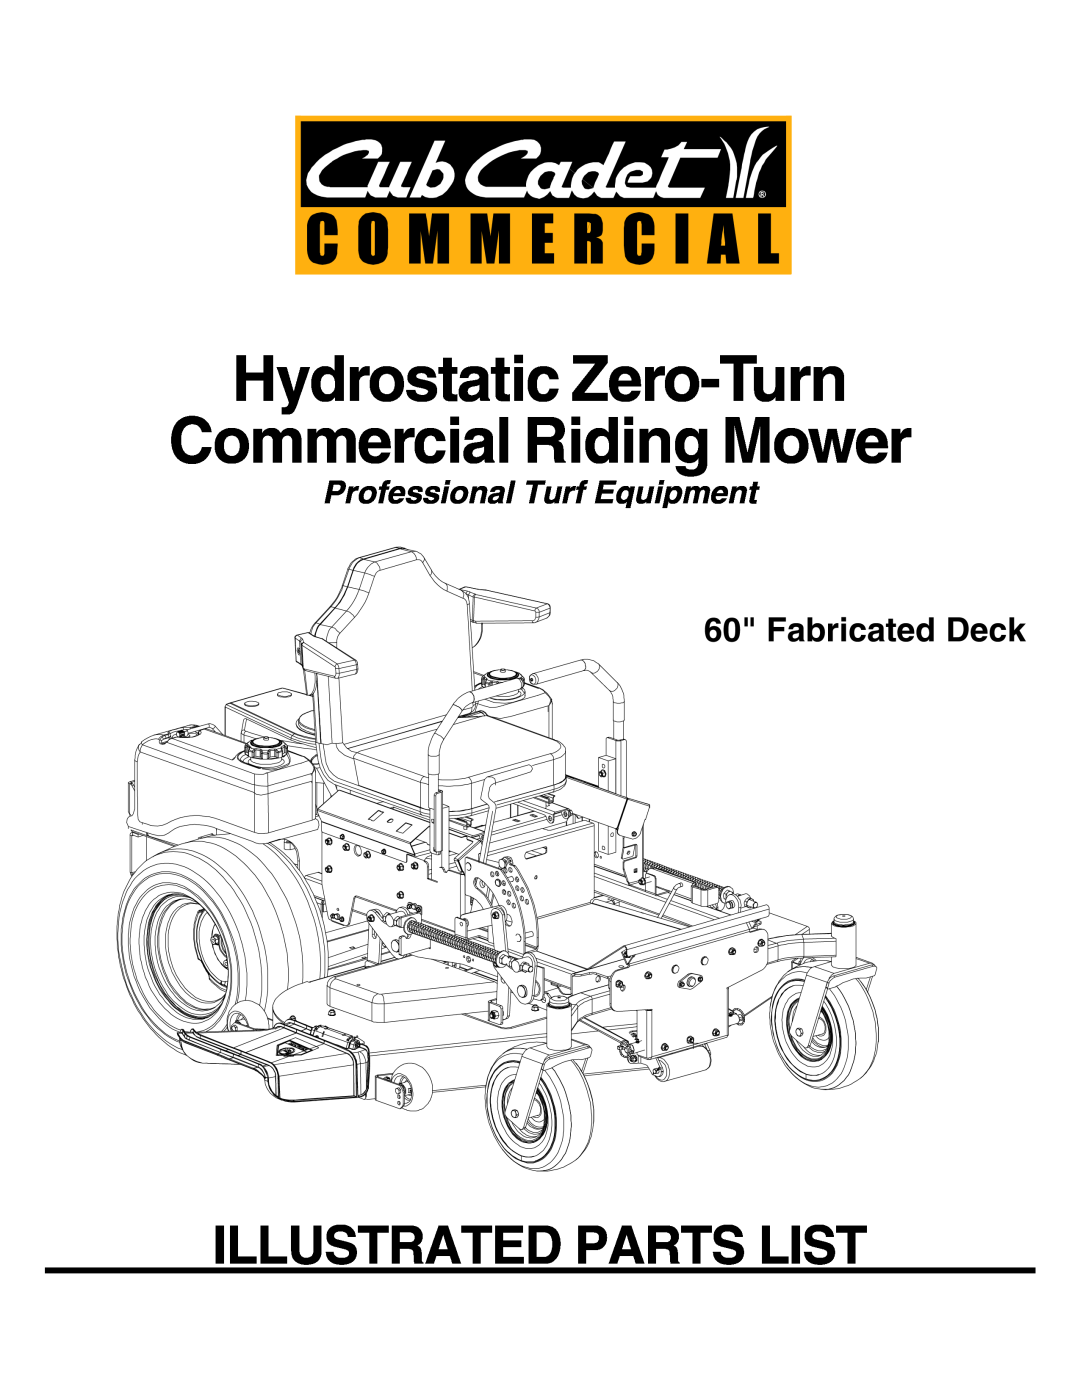 Cub Cadet Lawn Mower manual Hydrostatic Zero-Turn Commercial Riding Mower, Illustrated Parts List, Fabricated Deck 